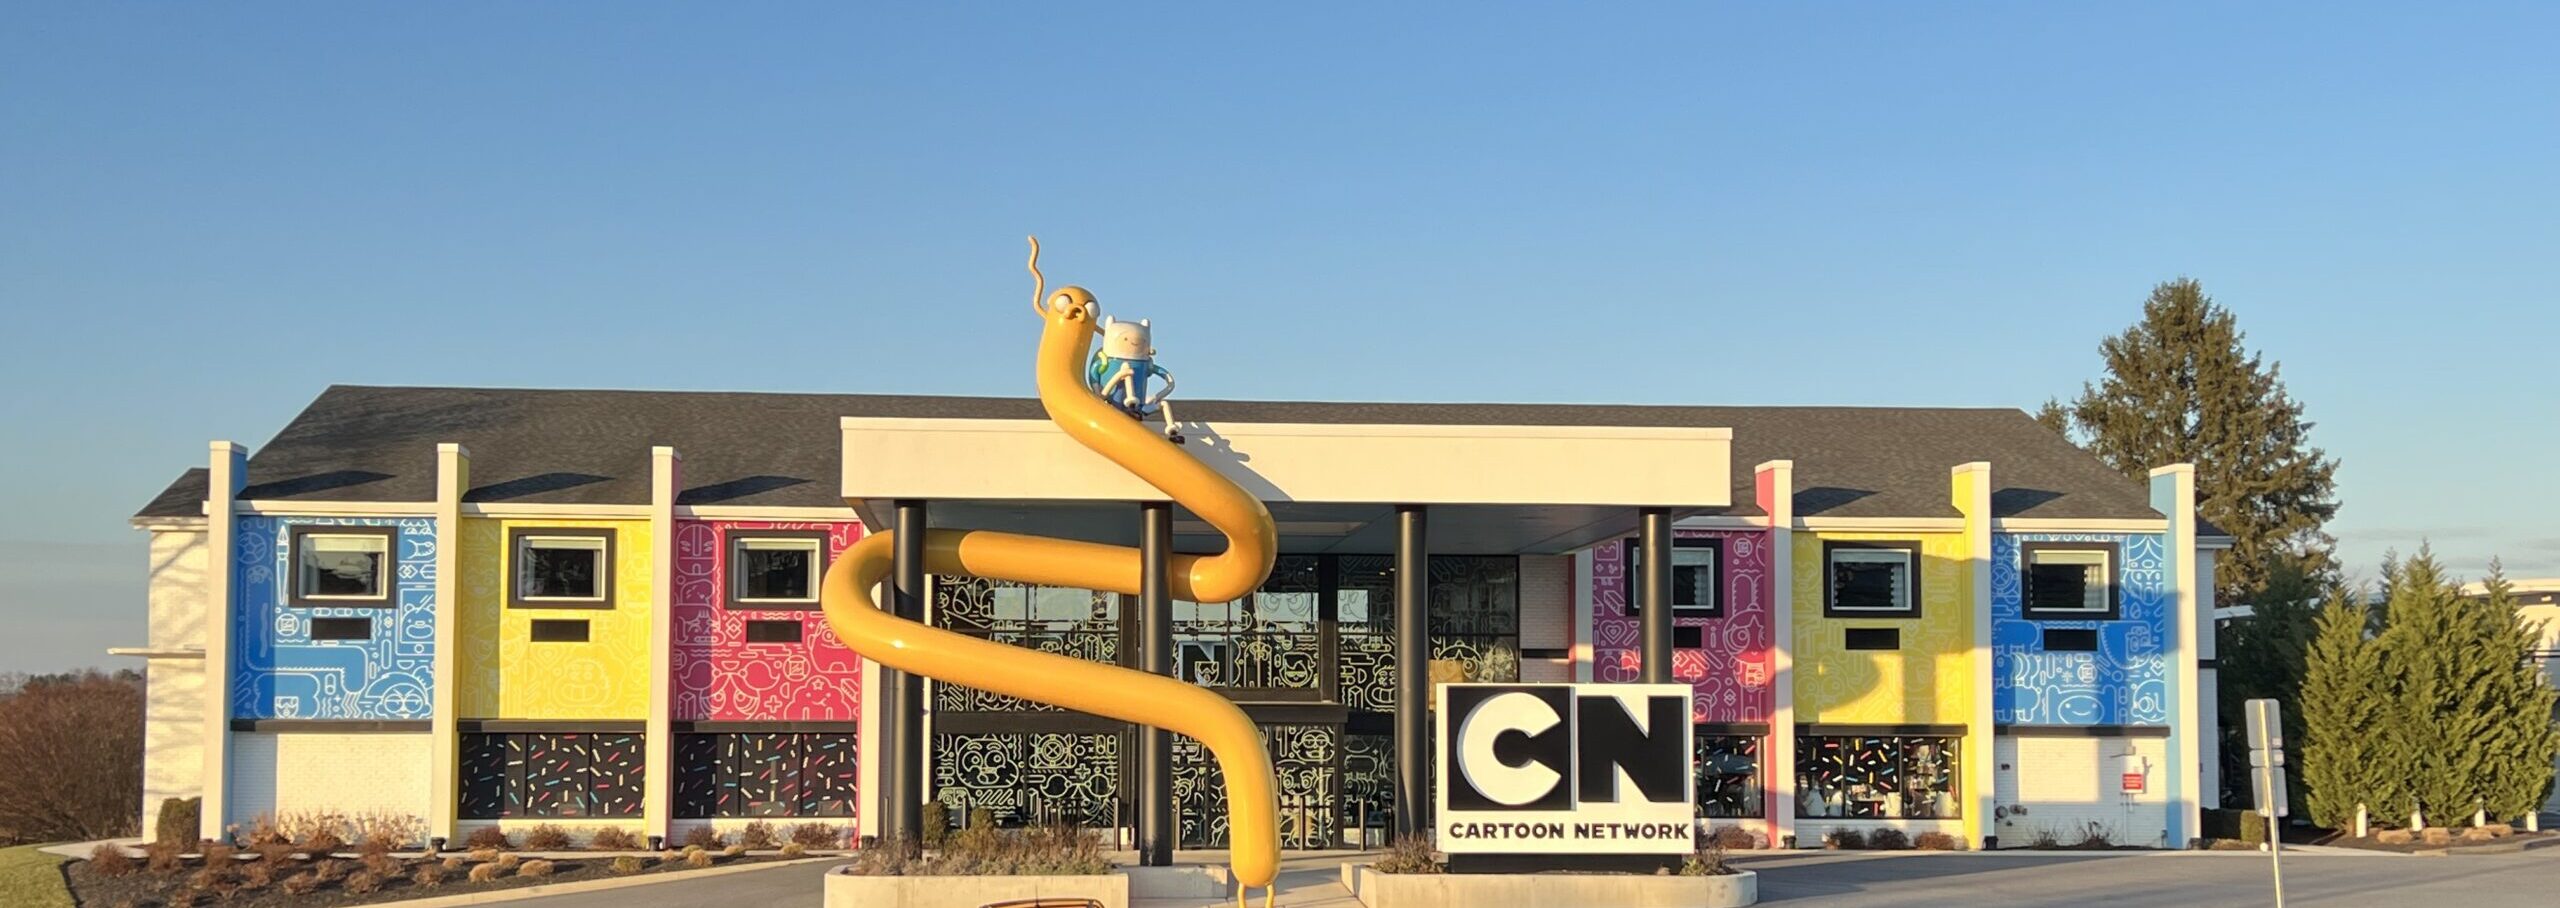 What You Need To Know About The Cartoon Network Hotel And Dutch